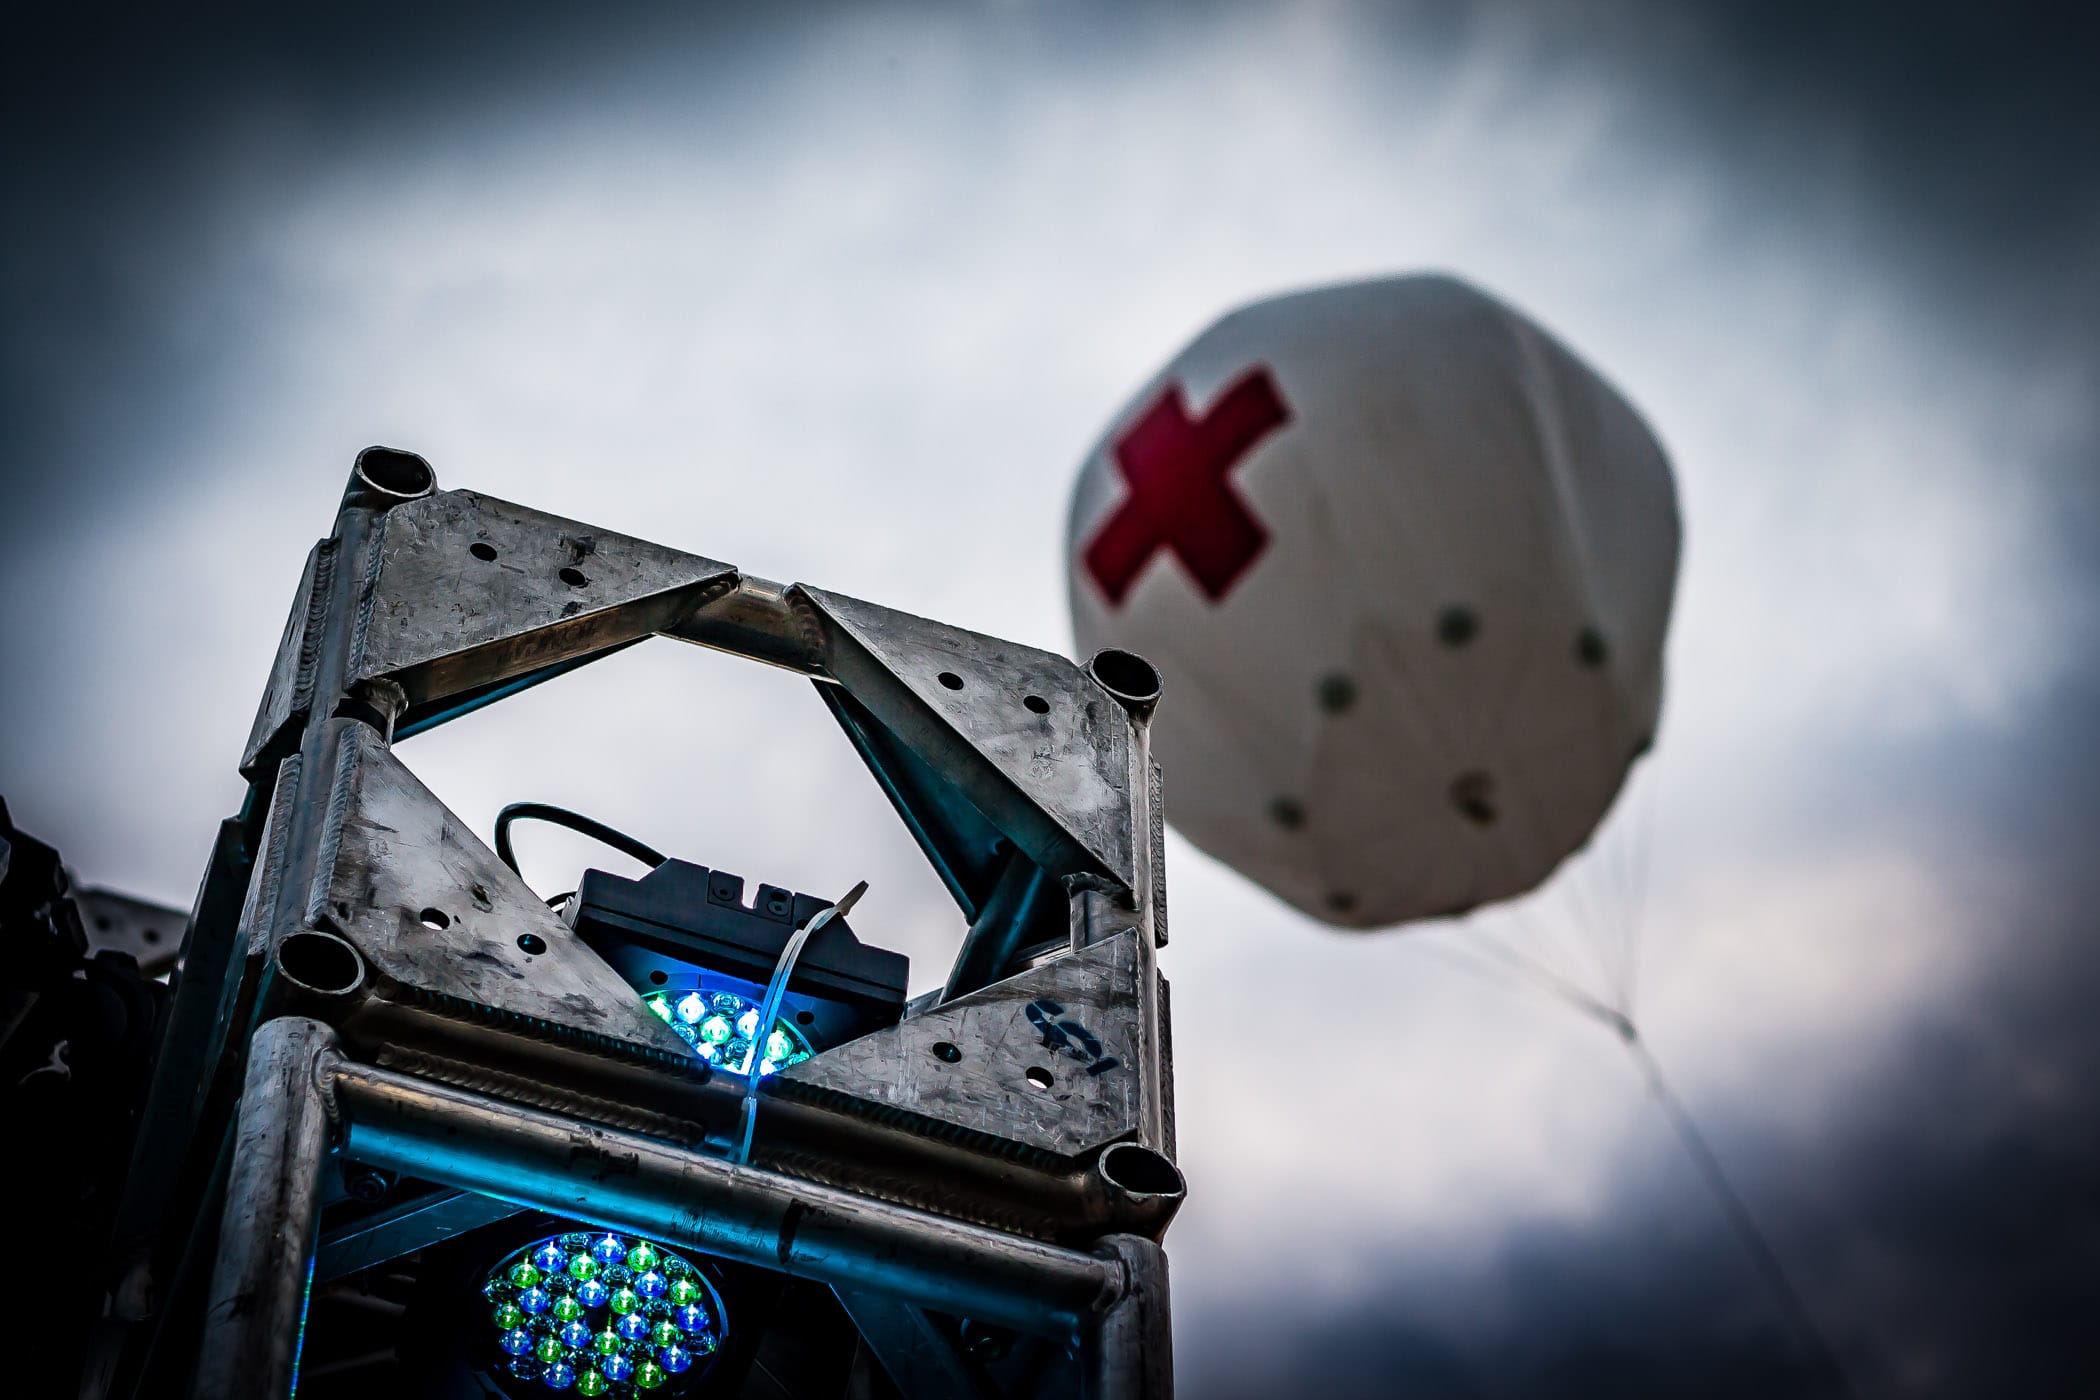 A lighting truss and a balloon marking the first aid station at the Plano Balloon Festival, Texas.